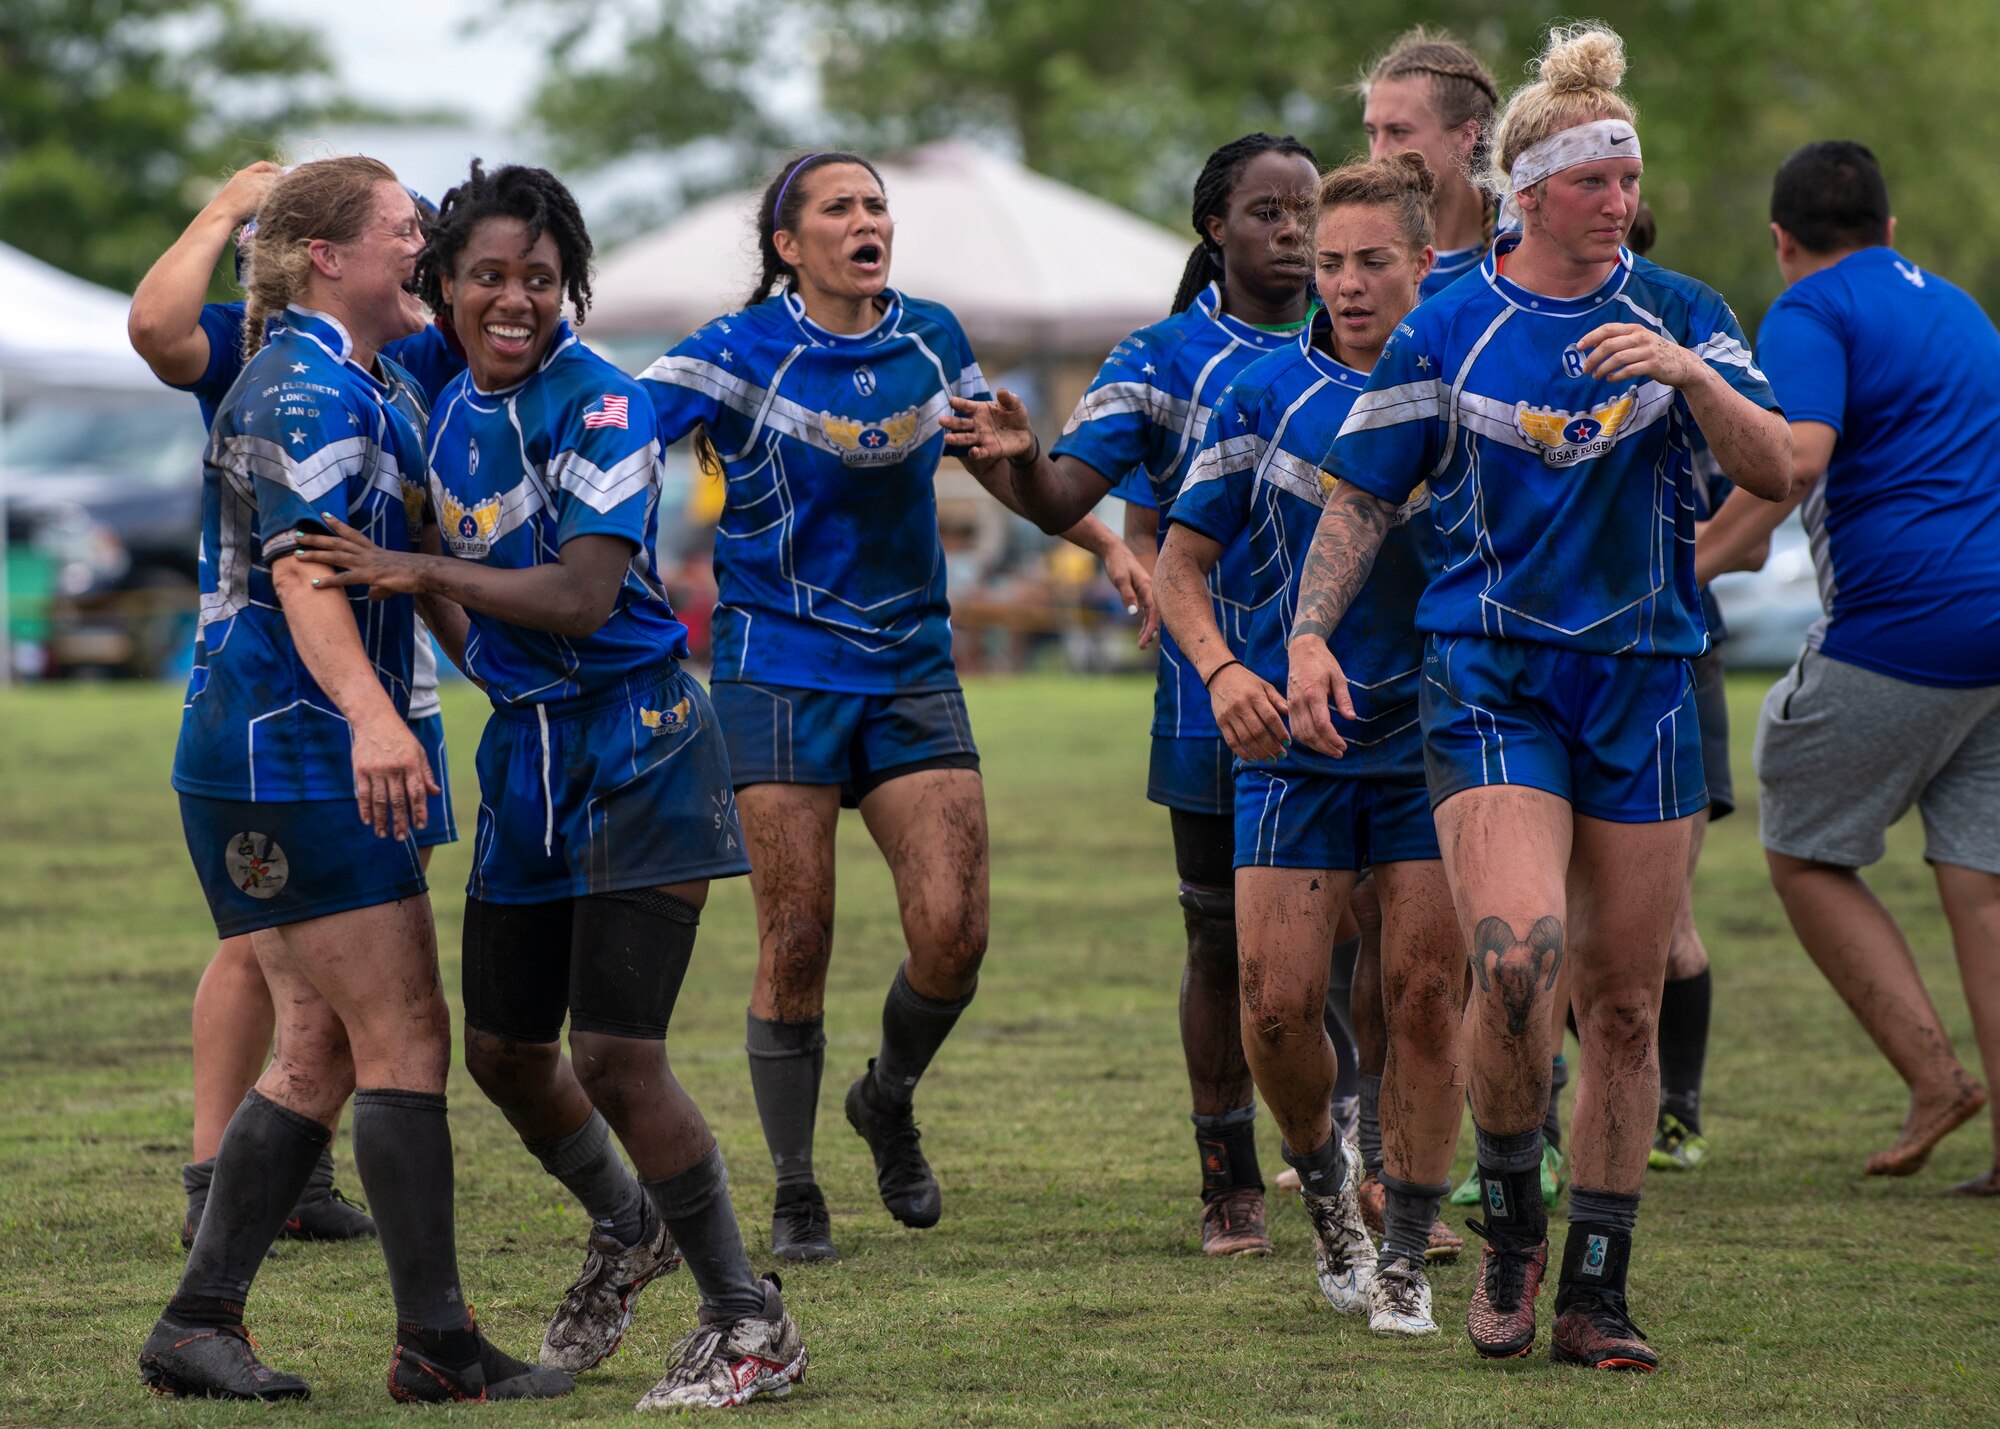 Members of the United States Air Force women’s rugby team gather after winning a match at the Annual Armed Forces Women’s Rugby Championship in Wilmington, North Carolina, June 26, 2021.